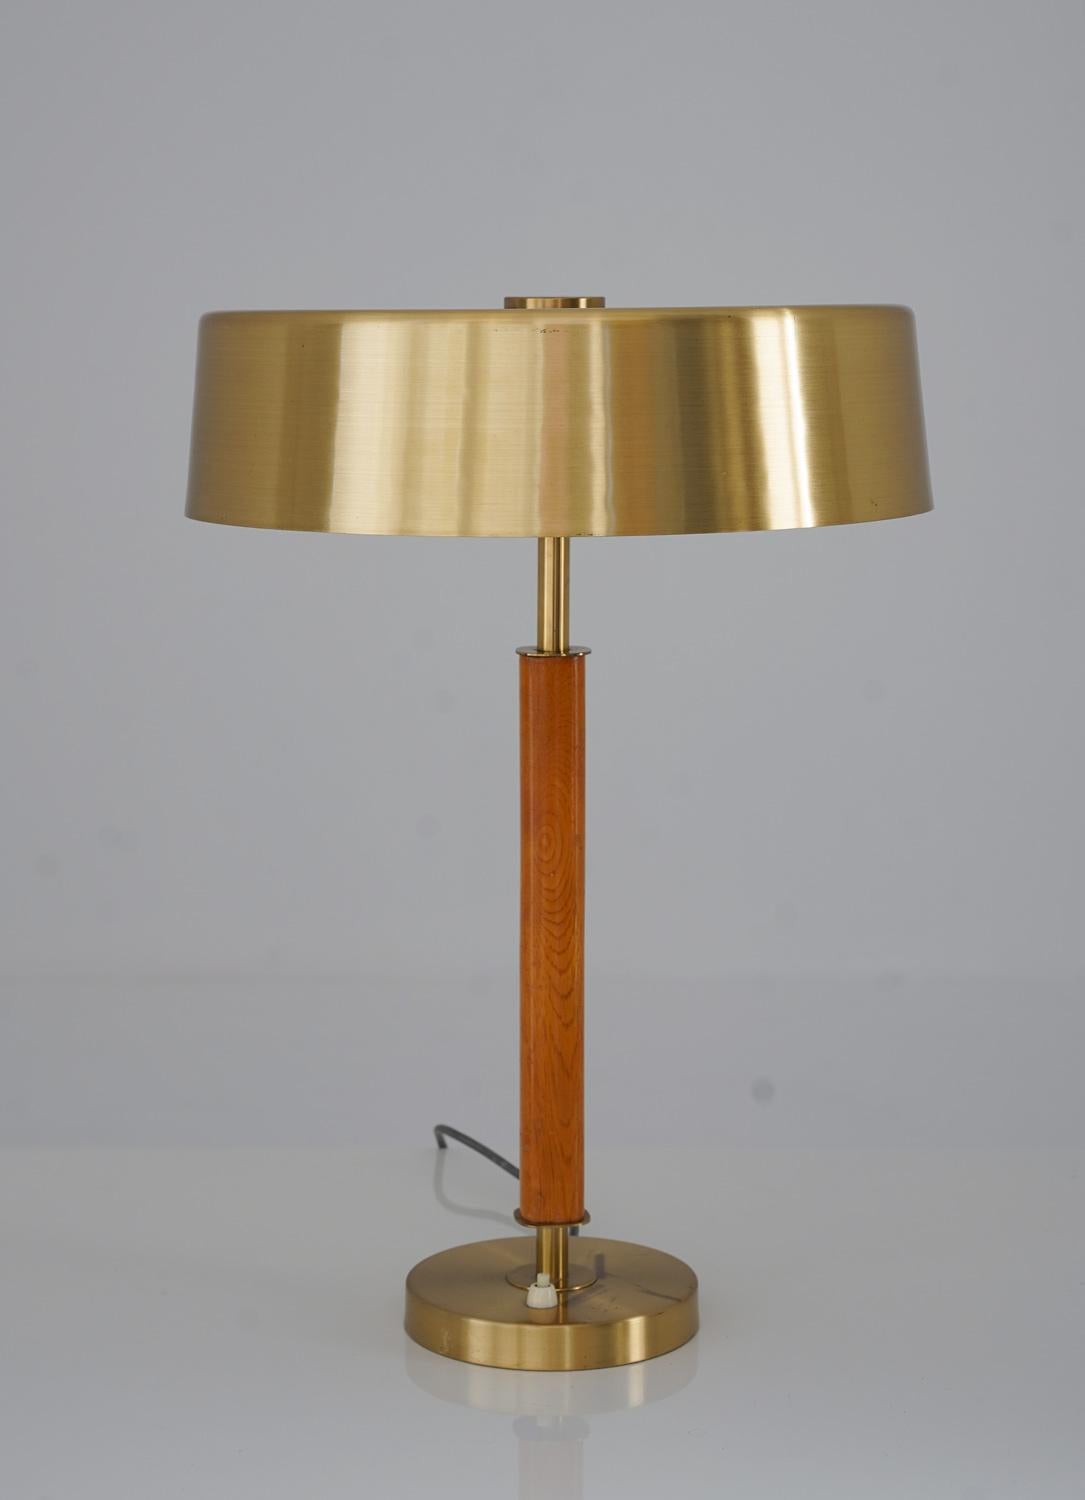 The Boréns table lamp is a stunning piece of Scandinavian design. The lamp features a stem made of brushed brass, surrounded by a shade and sitting on a foot in the same material. The combination of brass and oak creates a warm and inviting